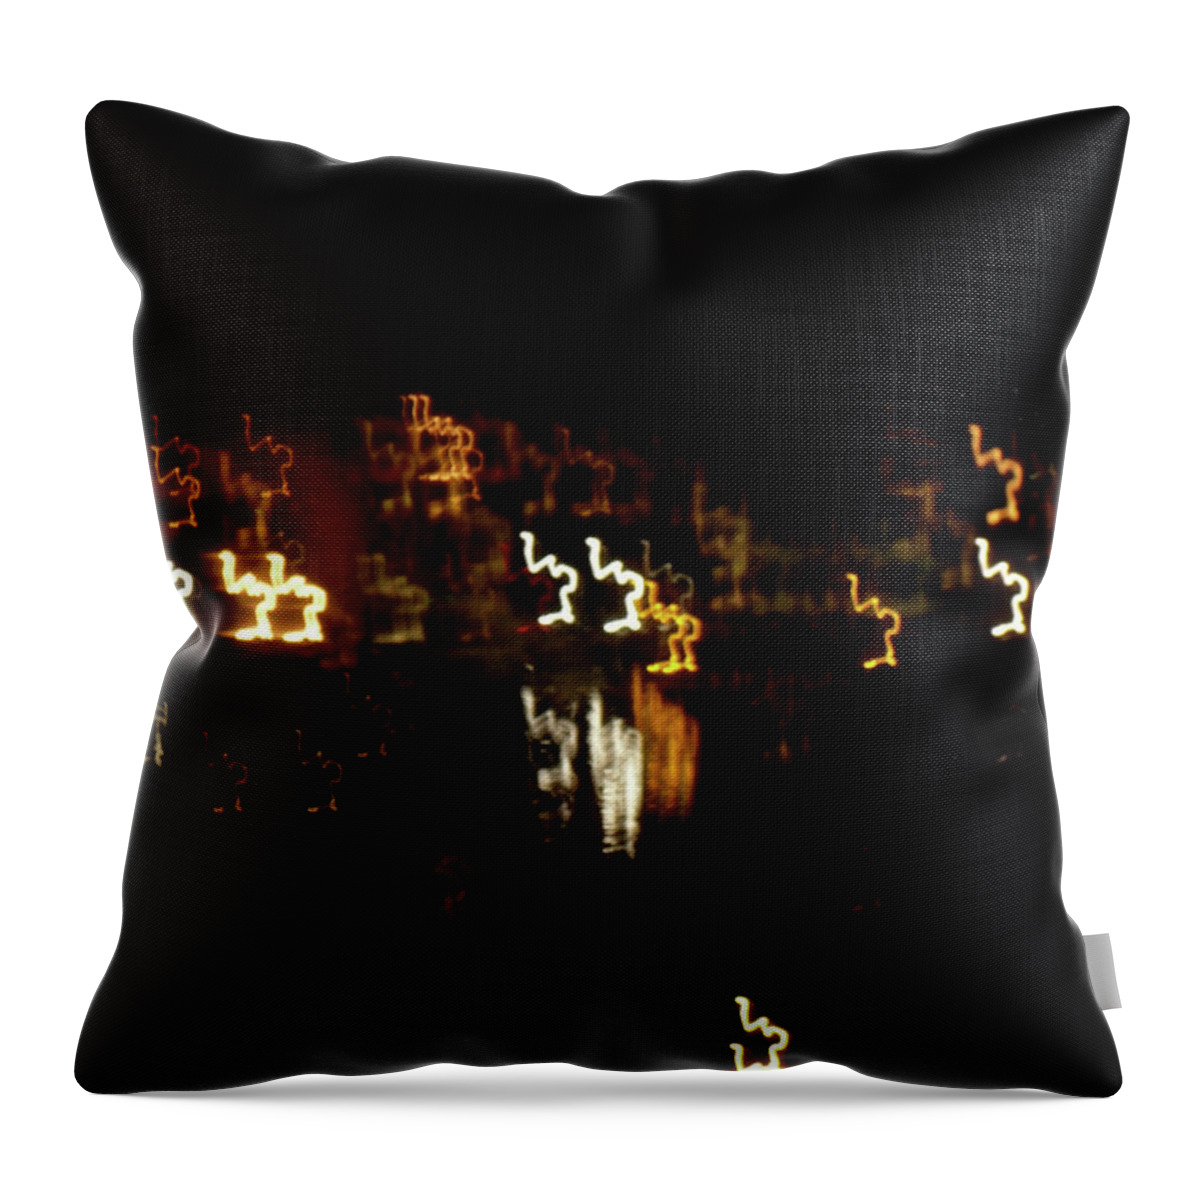 Inart Throw Pillow featuring the photograph The Night Race by Marwan George Khoury